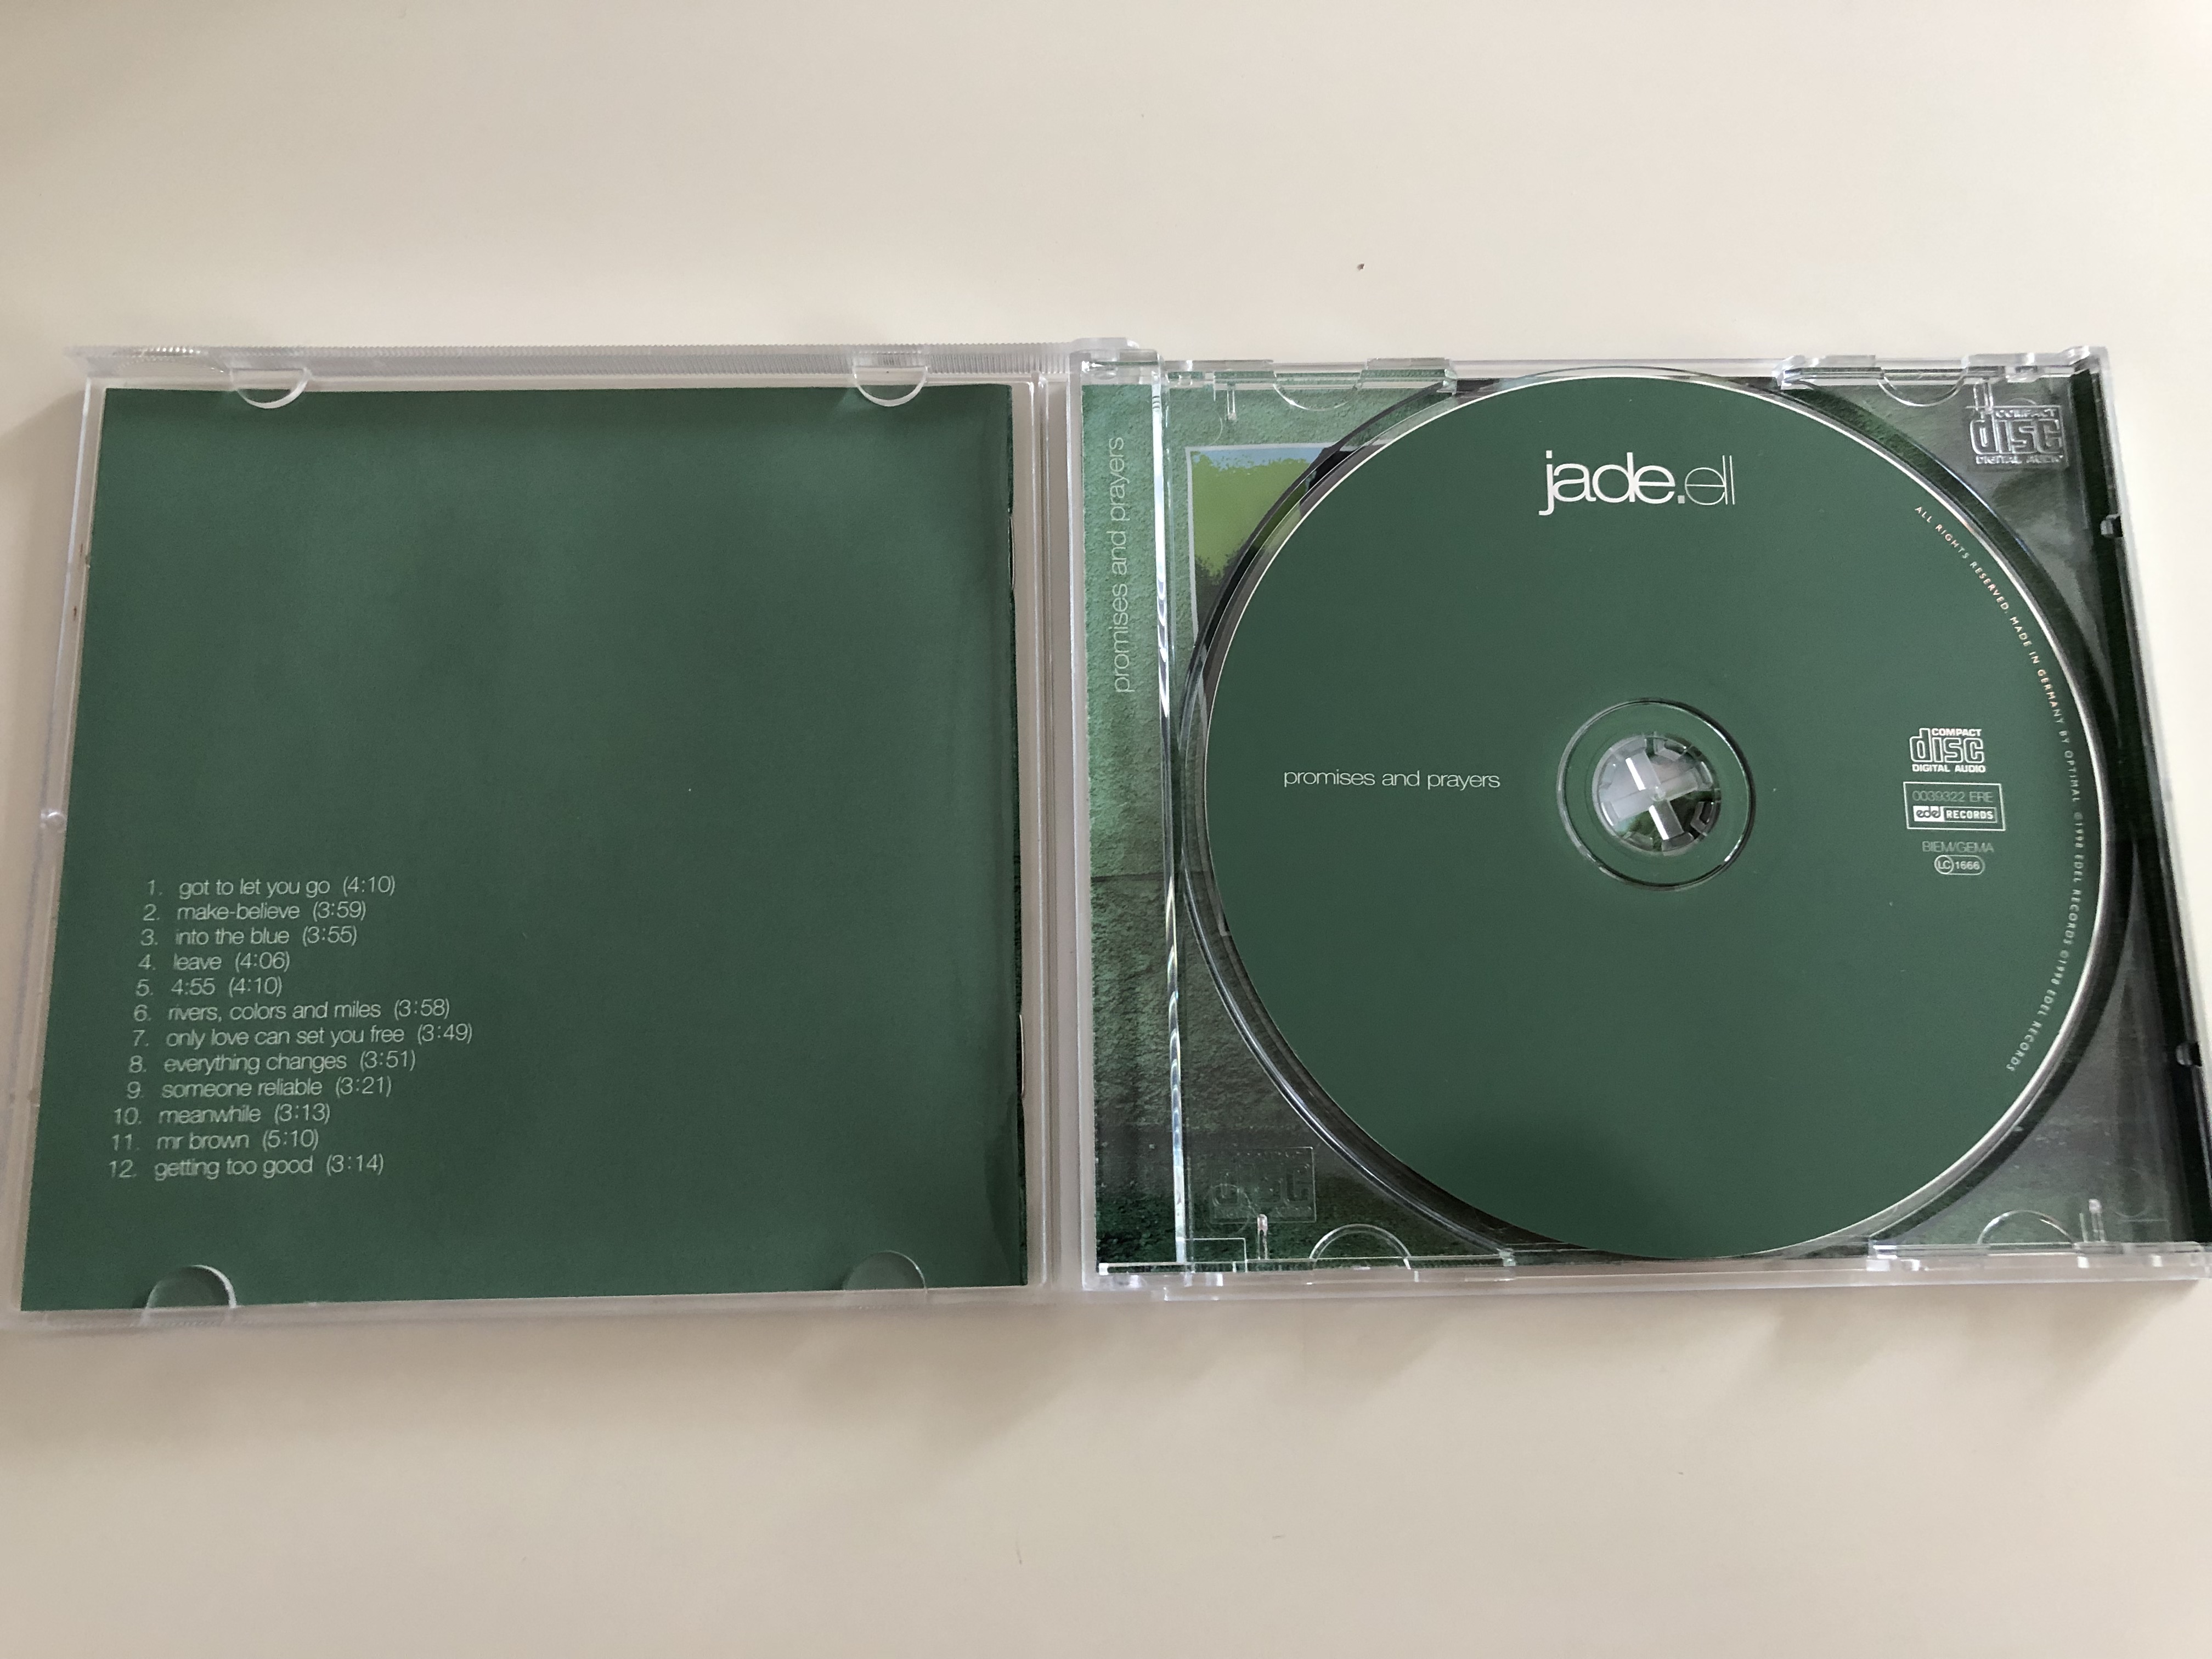 jade.ell-promises-and-prayers-make-believe-leave-someone-reliable-getting-too-good-audio-cd-1998-39322ere-8-.jpg